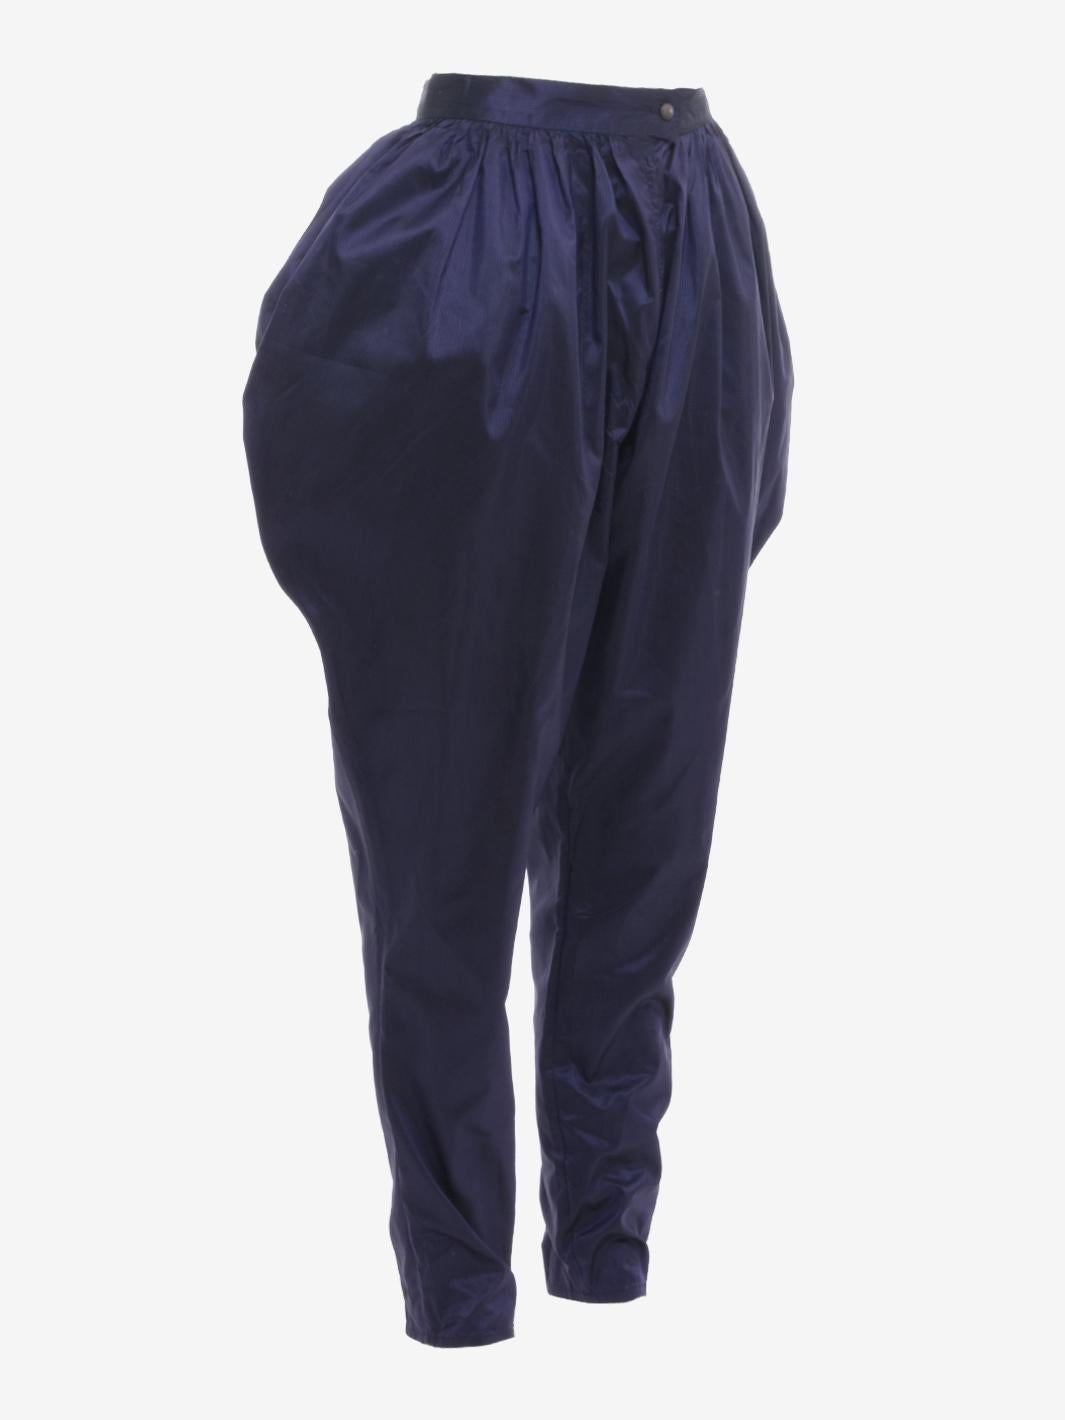 Krizia Silk Ballon Pants is a pair of Indian-style pants probably made in the late 1970s. The garment features a high buttoned waist, side pockets and a soft, cool fit thanks in part to the silk fabric. The special feature of the pants is also the